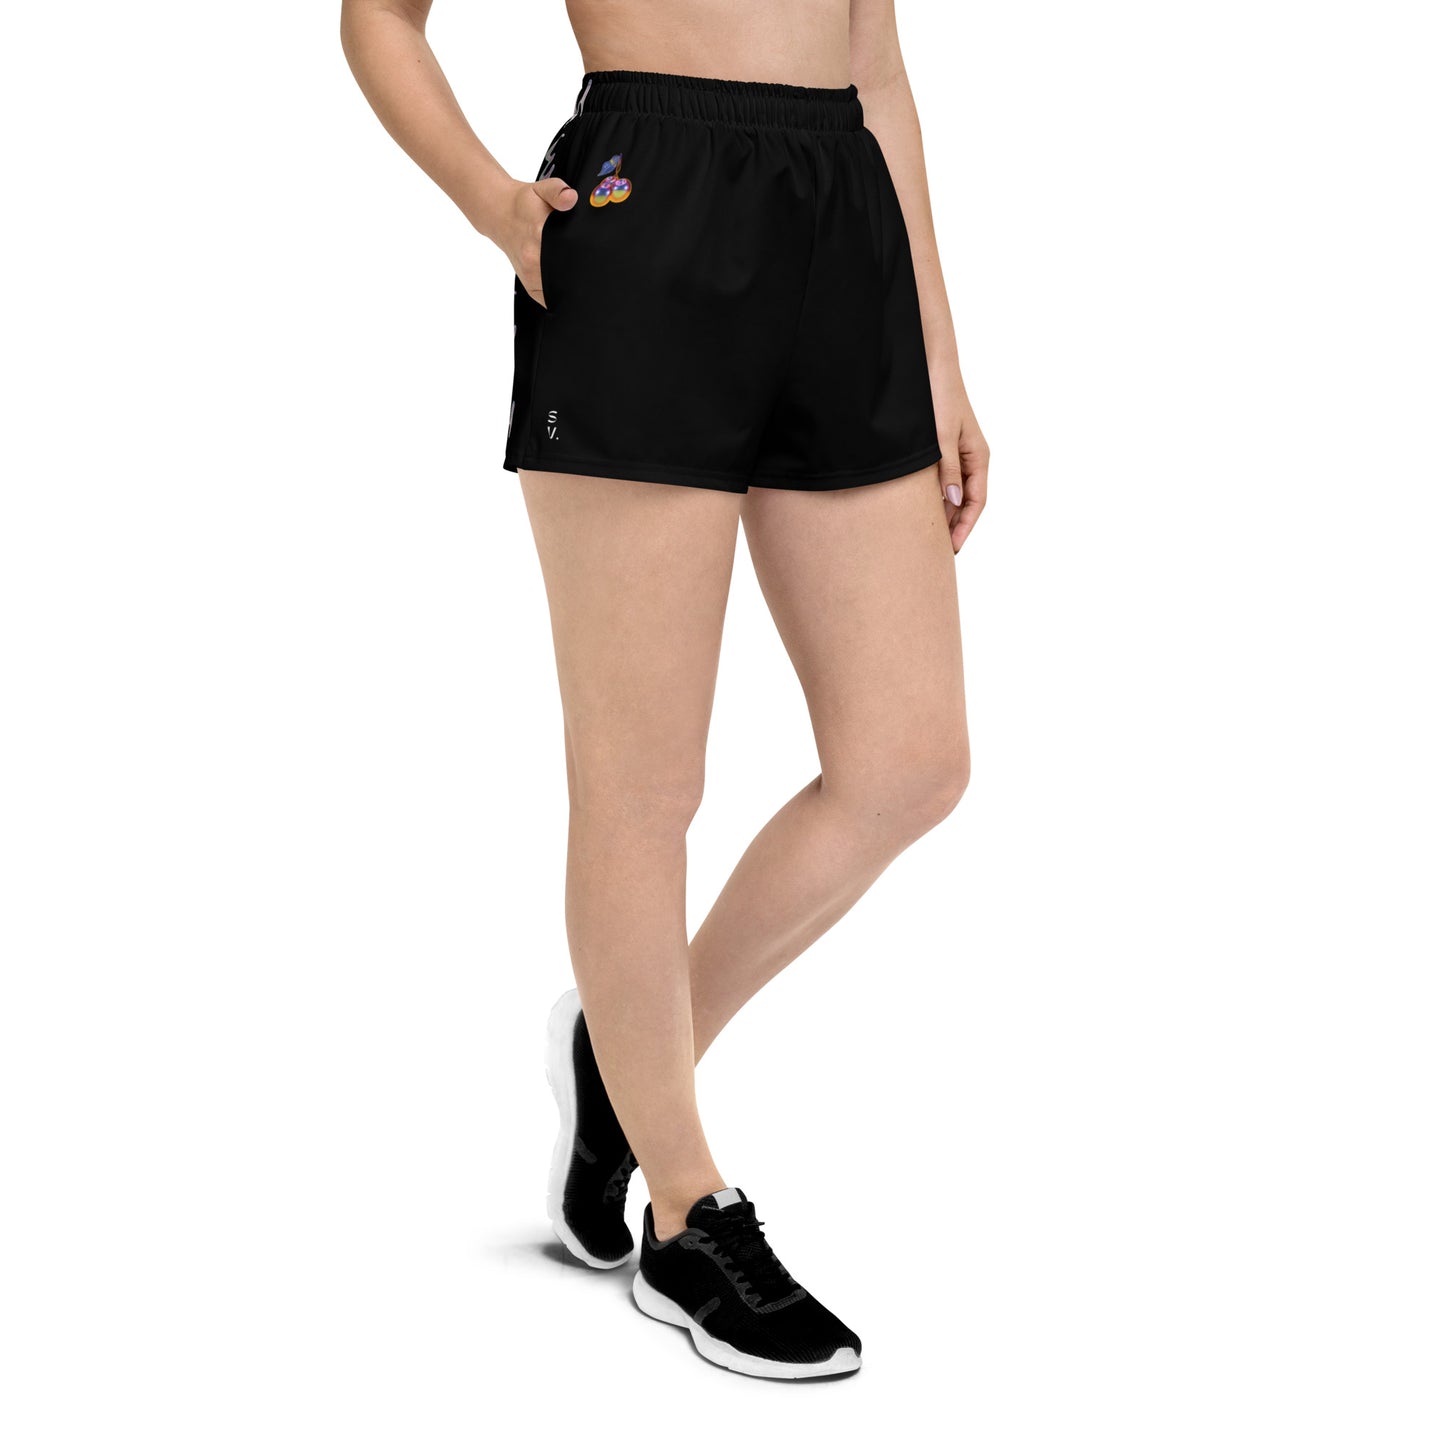 [Cherry Bomb] - Women’s (Recycled) Athletic Shorts